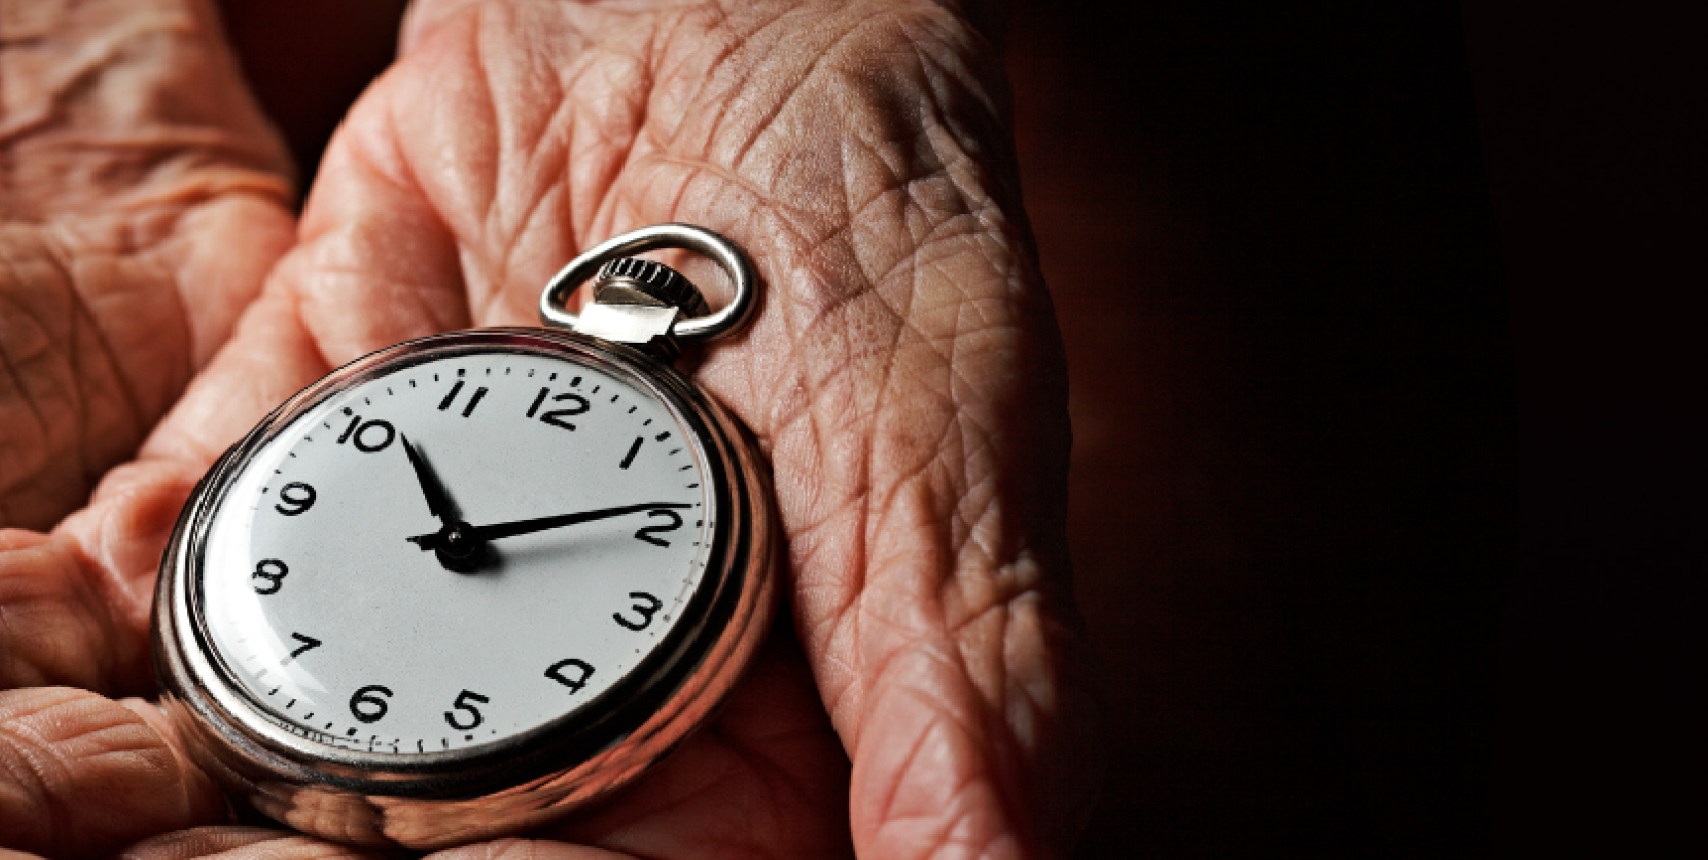 The hands of an aged person holding a pocket watch.